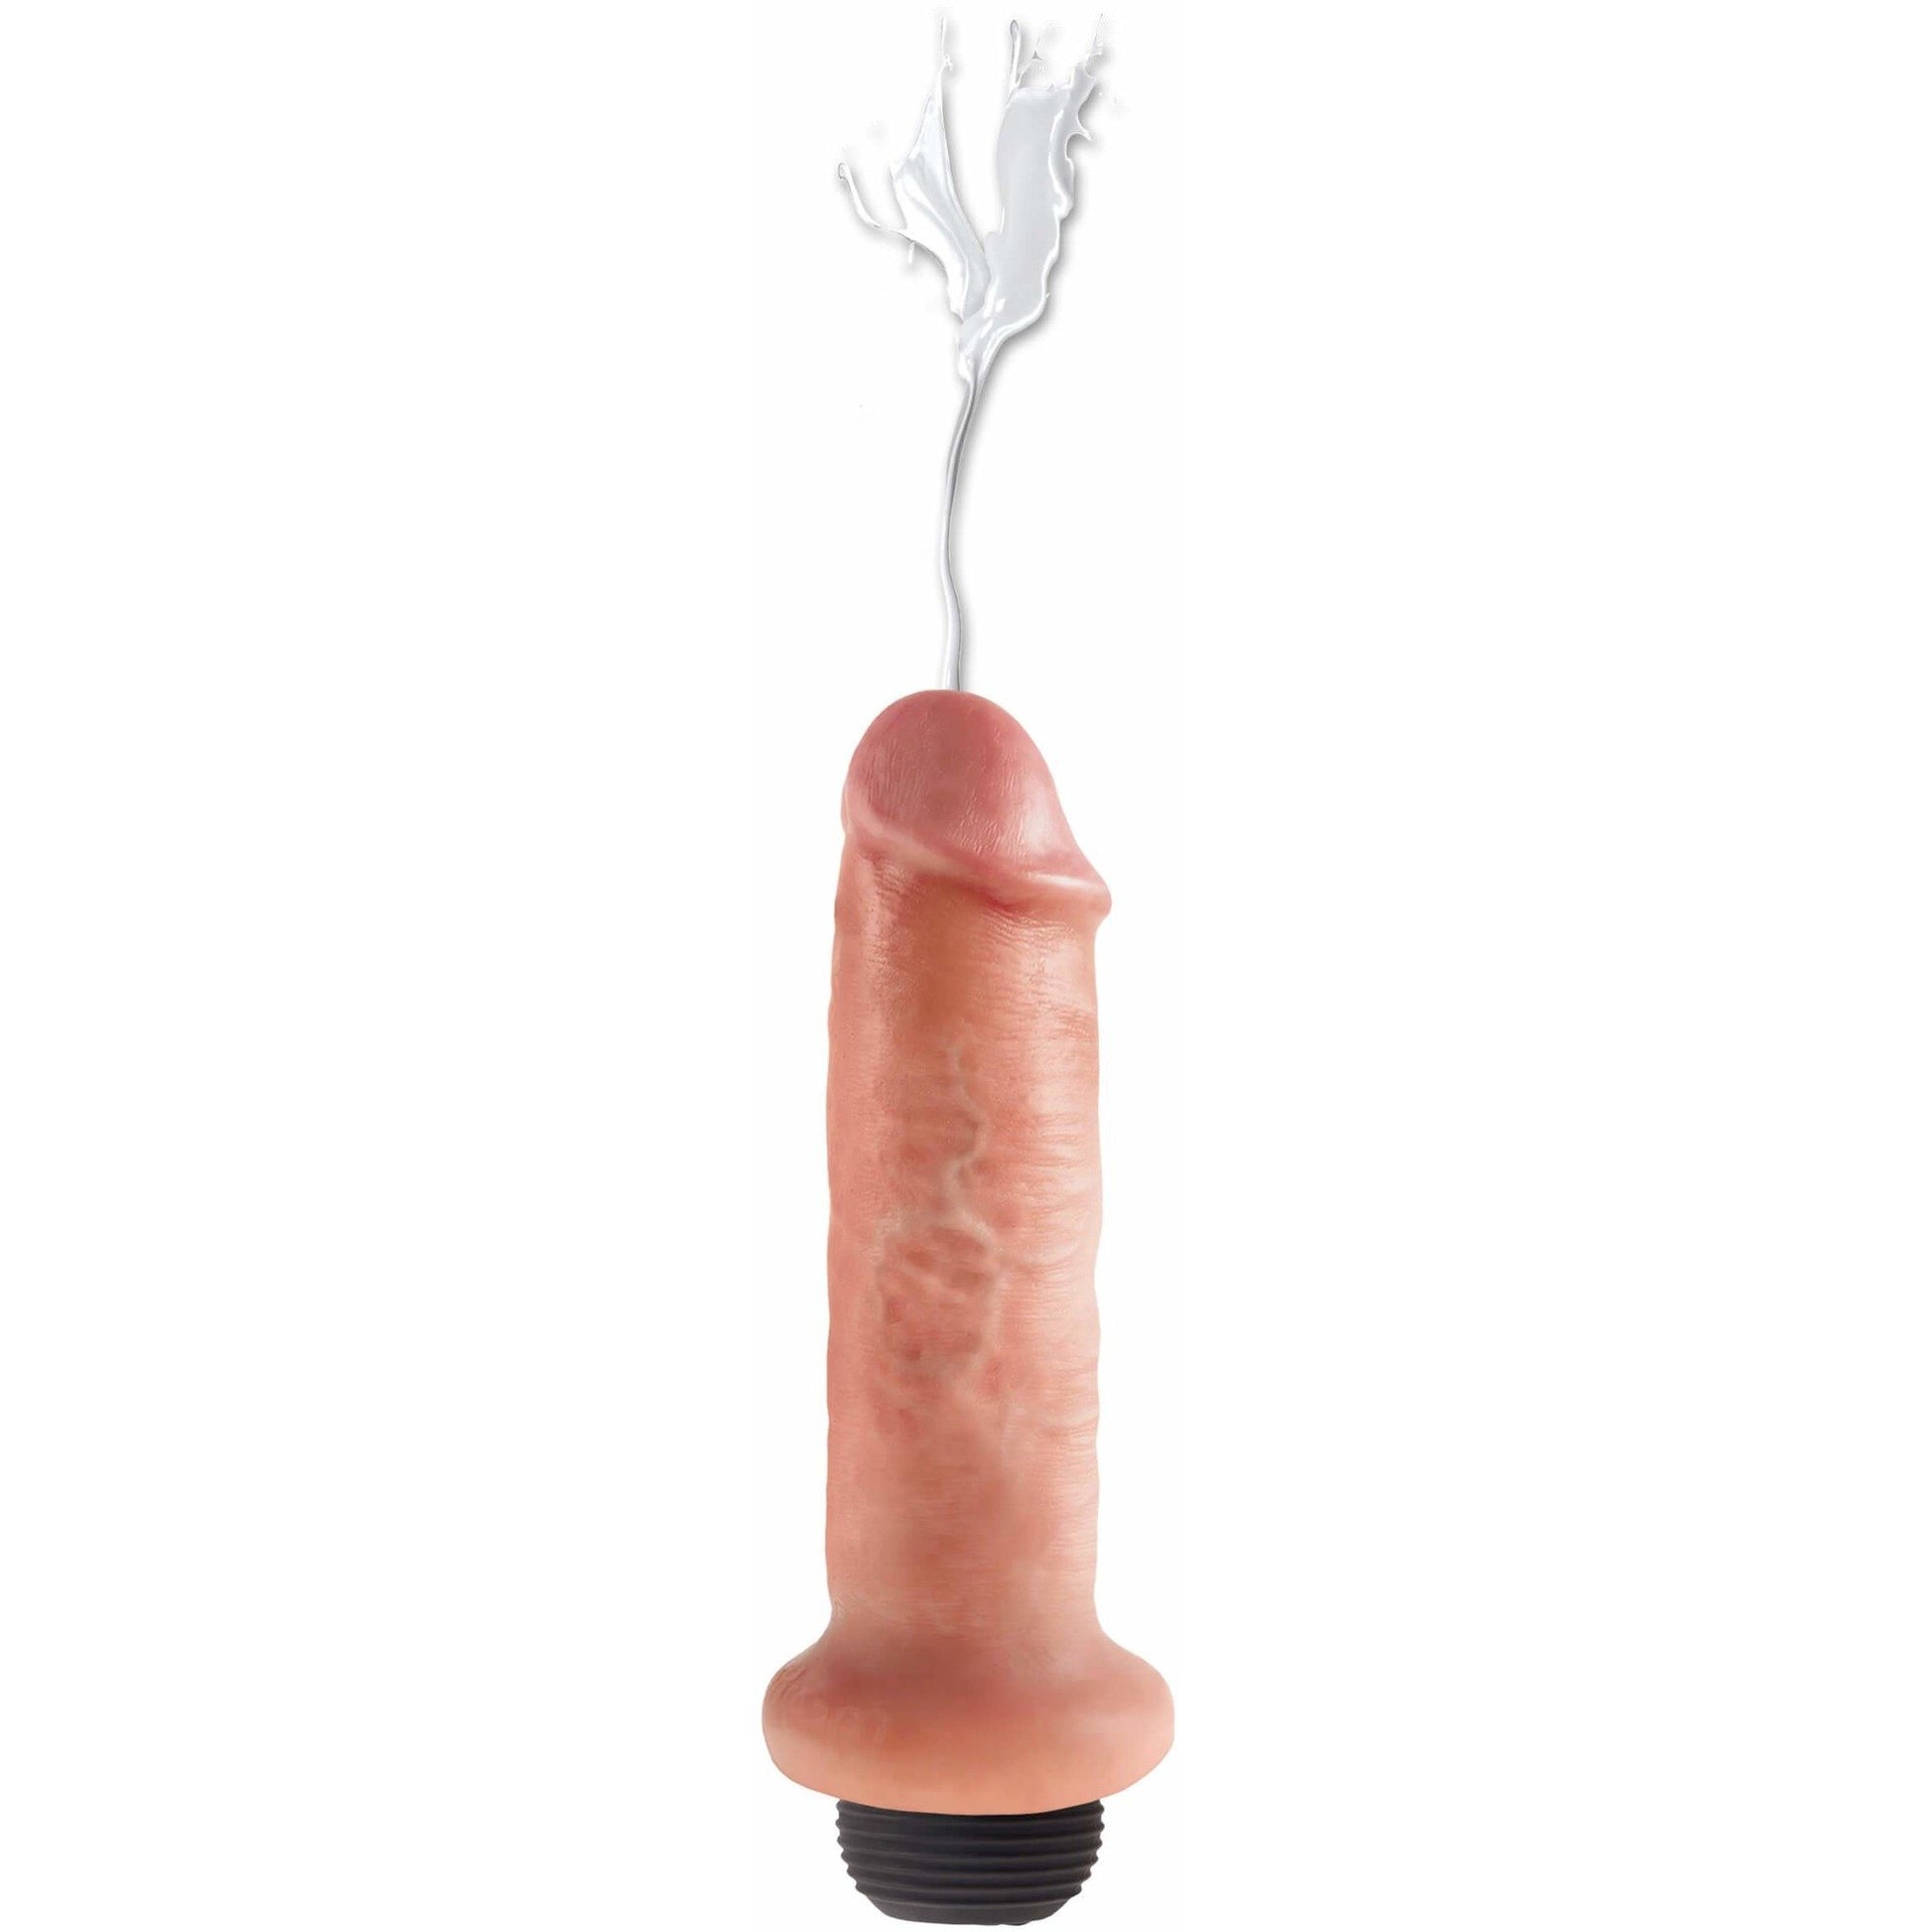 King Cock 6" Squirting Realistic Dildo + Free Accesories